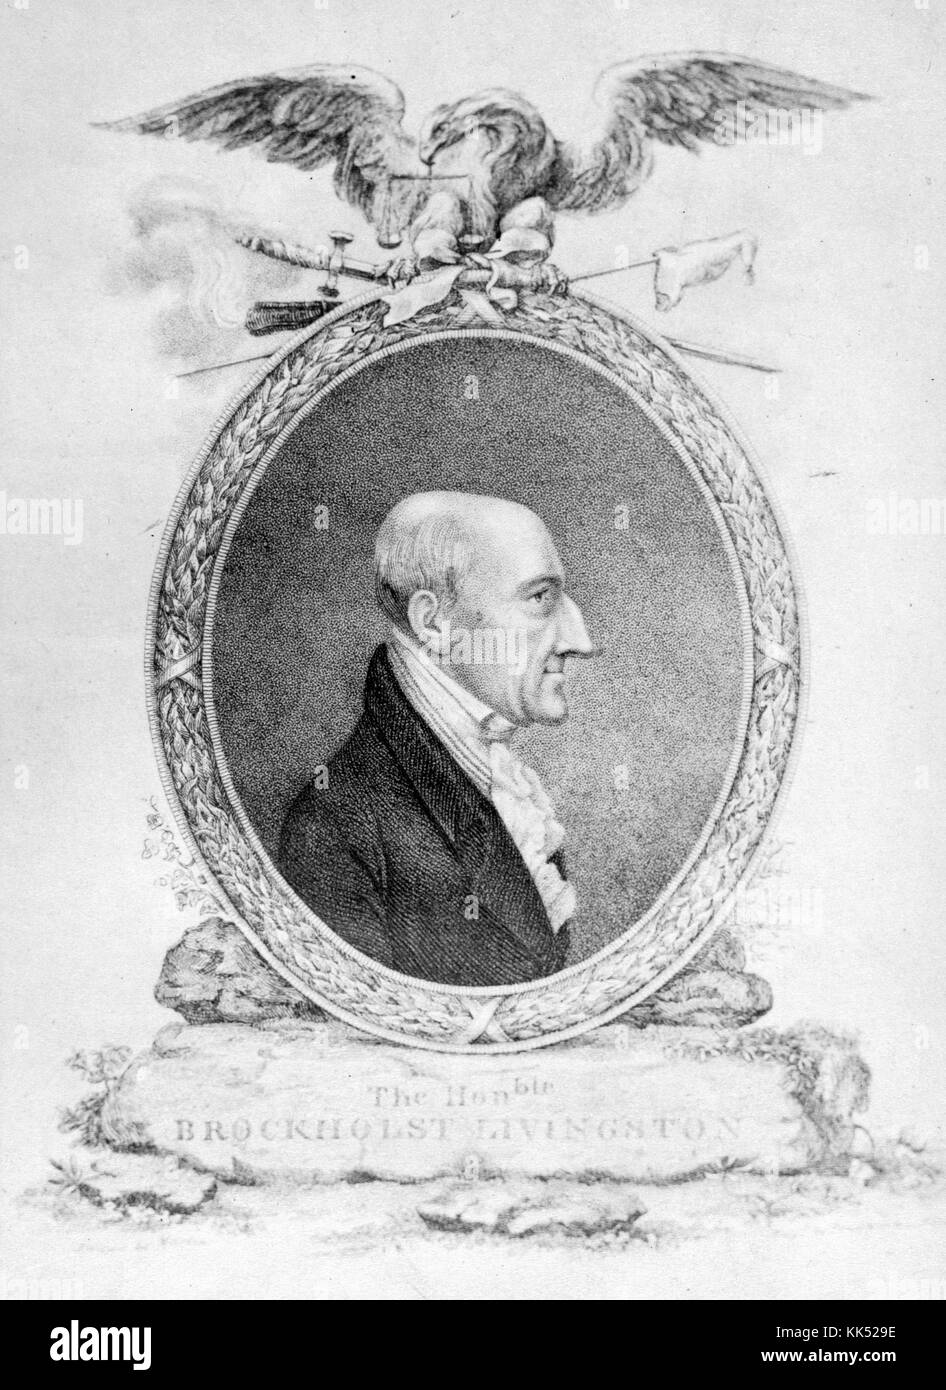 Portrait of Henry Brockholst Livingston, an American Revolutionary War officer, a justice of the New York Court of Appeals and eventually an Associate Justice of the Supreme Court of the United States (1802-1807), set in an oval, an eagle at the top pf it, captioned 'The Honble Brockholst Livingston', 1881. From the New York Public Library. Stock Photo